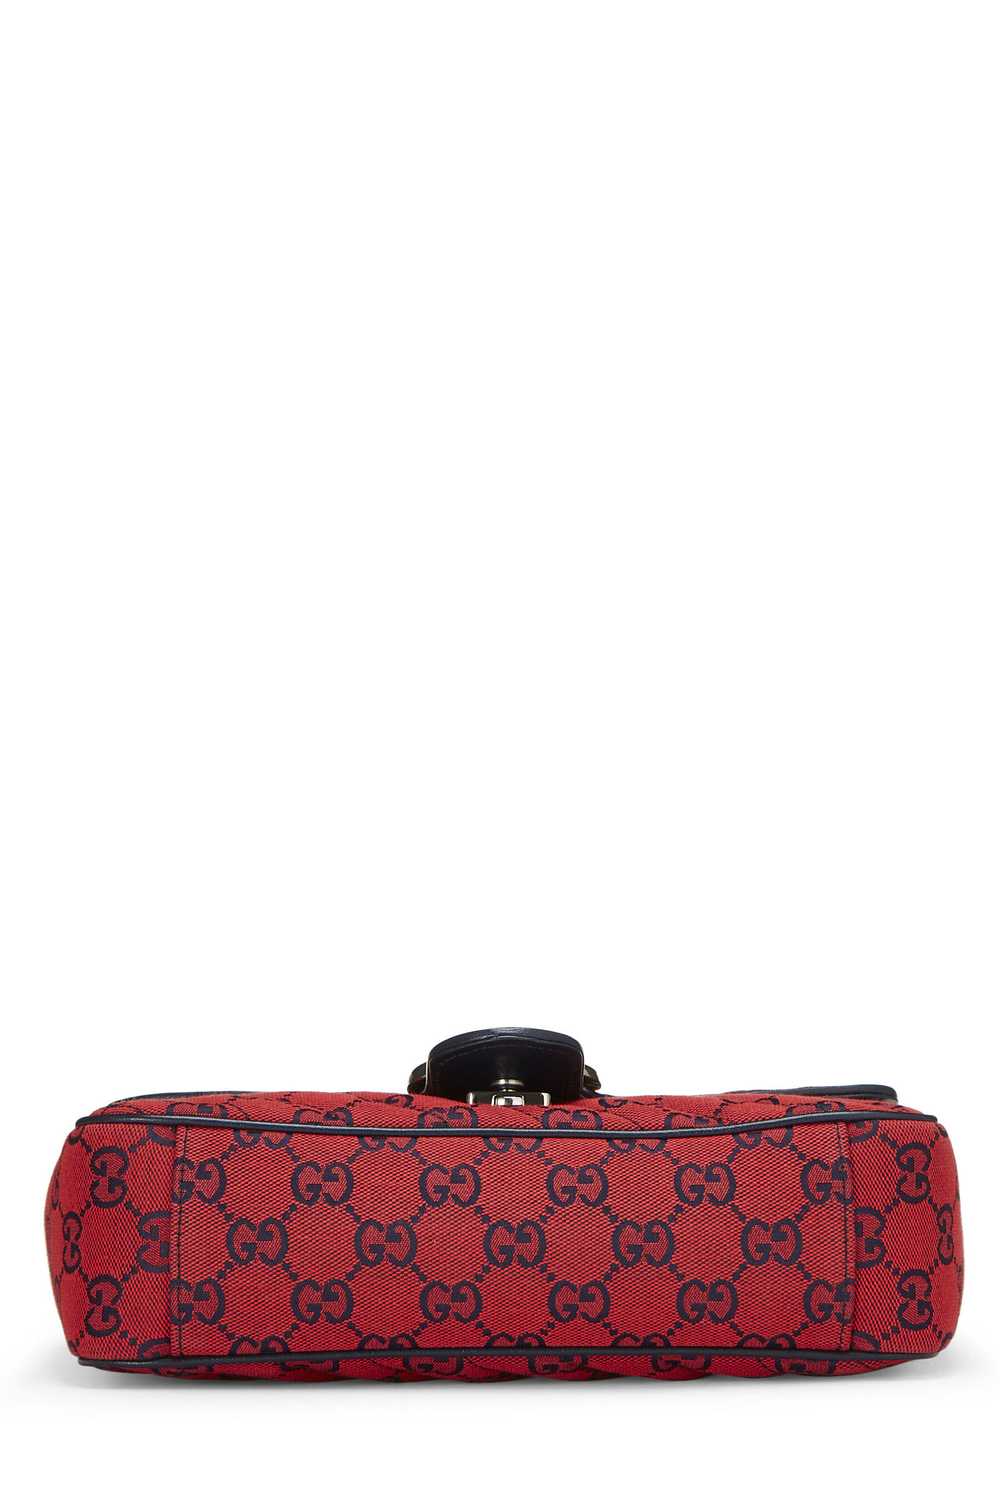 Red GG Canvas Marmont Shoulder Bag Small - image 5